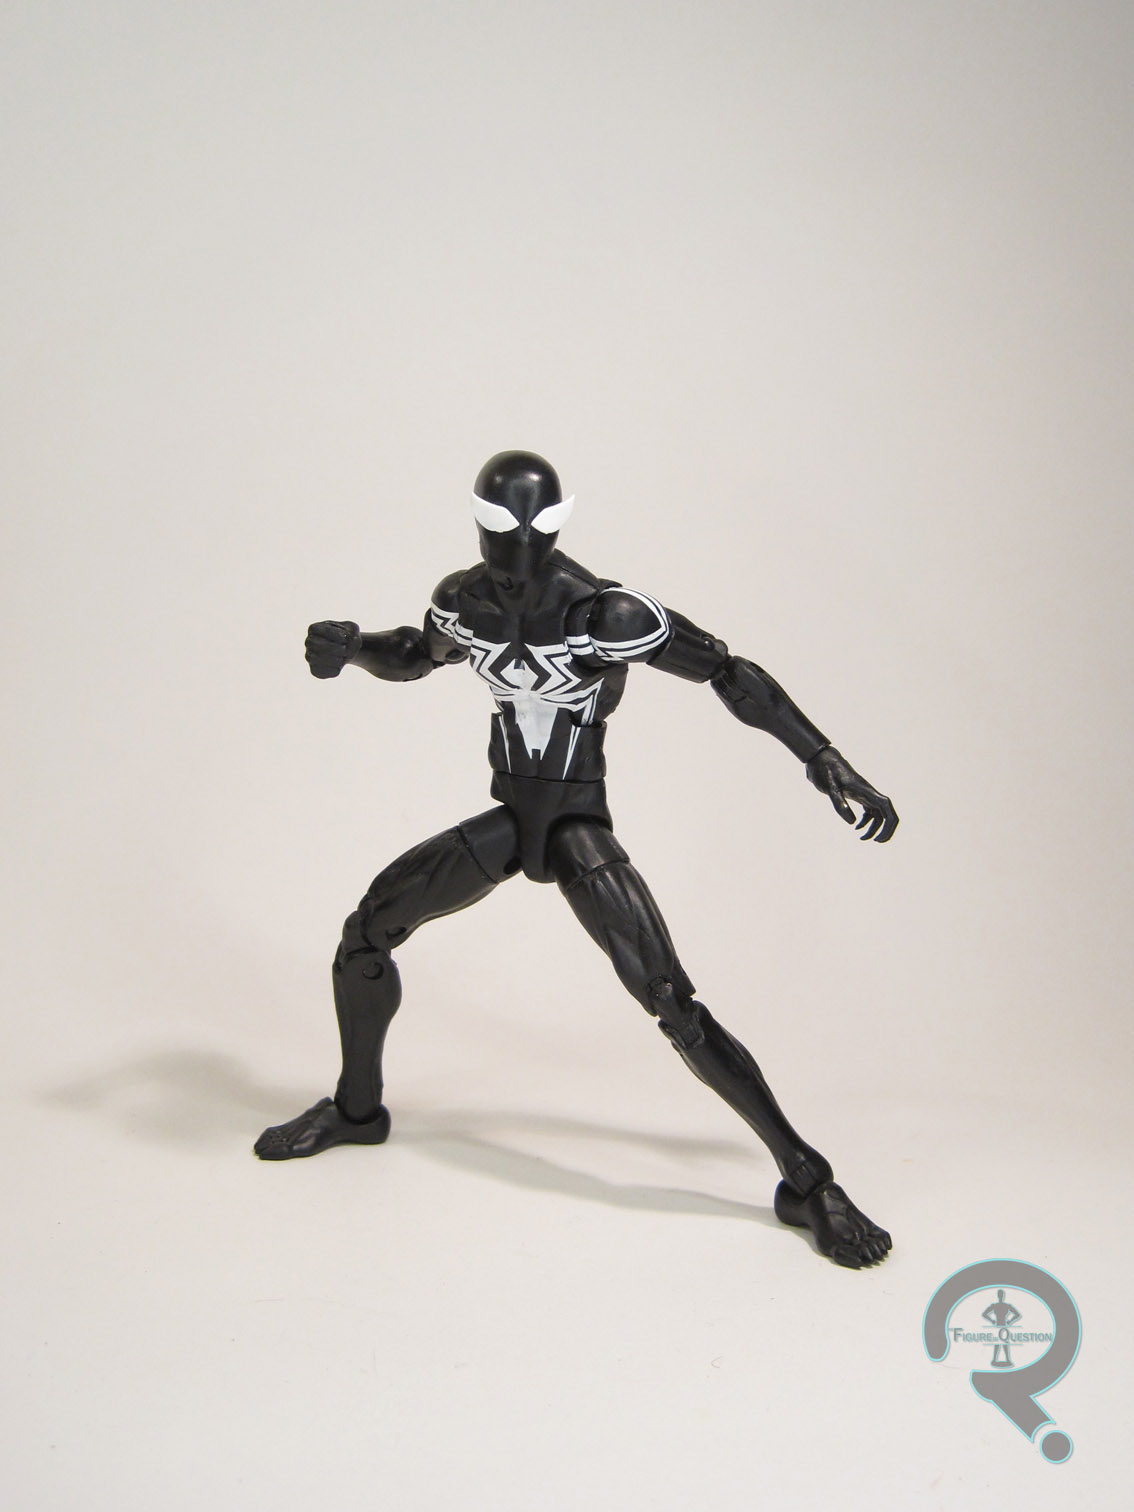 Review of Symbiote Tendrils from brilliant_demon – squeezeplayfigures